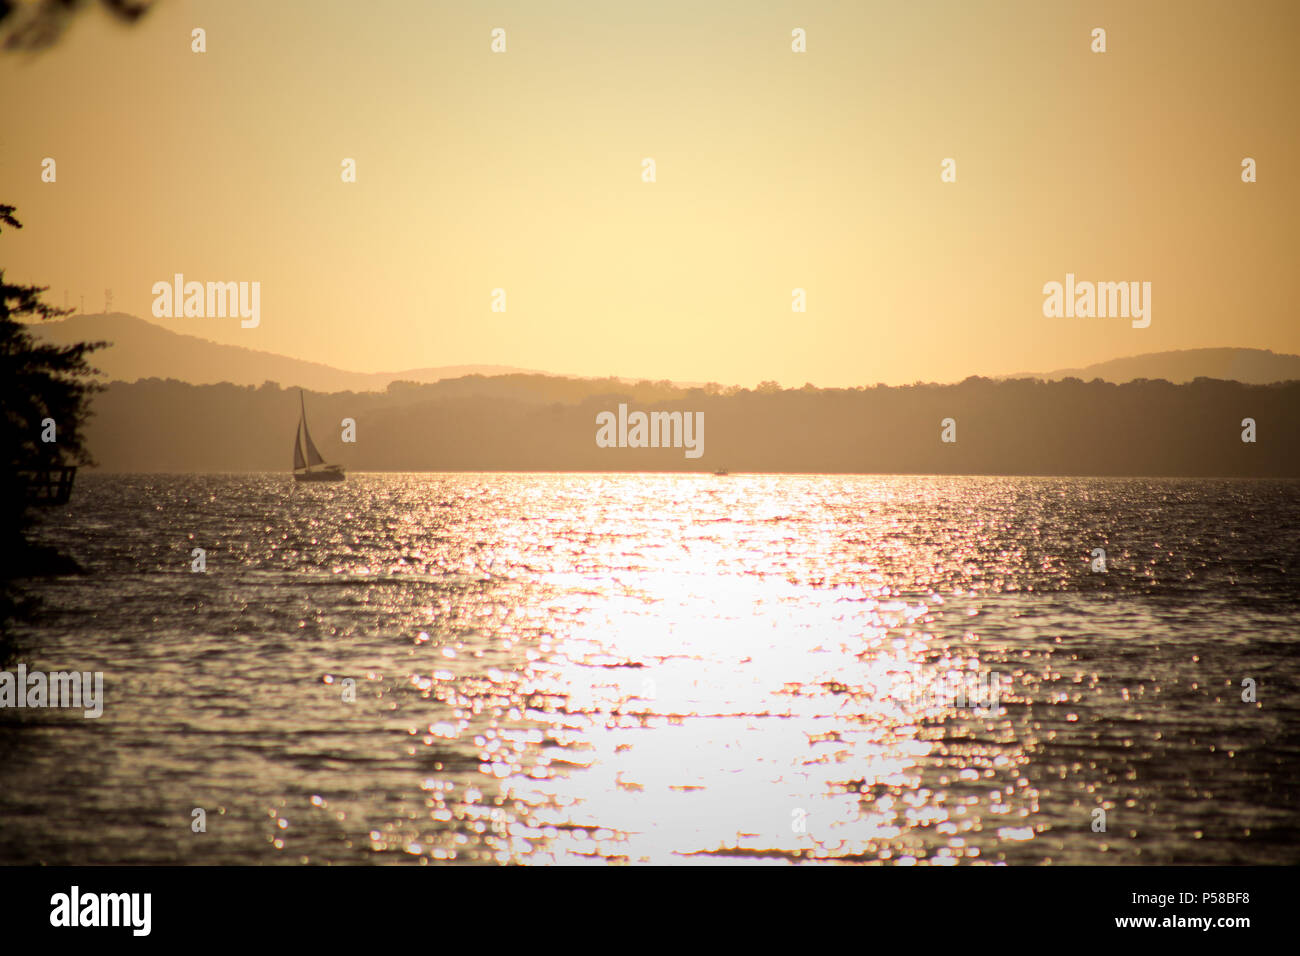 A series of lake photos during a Summer sunset. Stock Photo